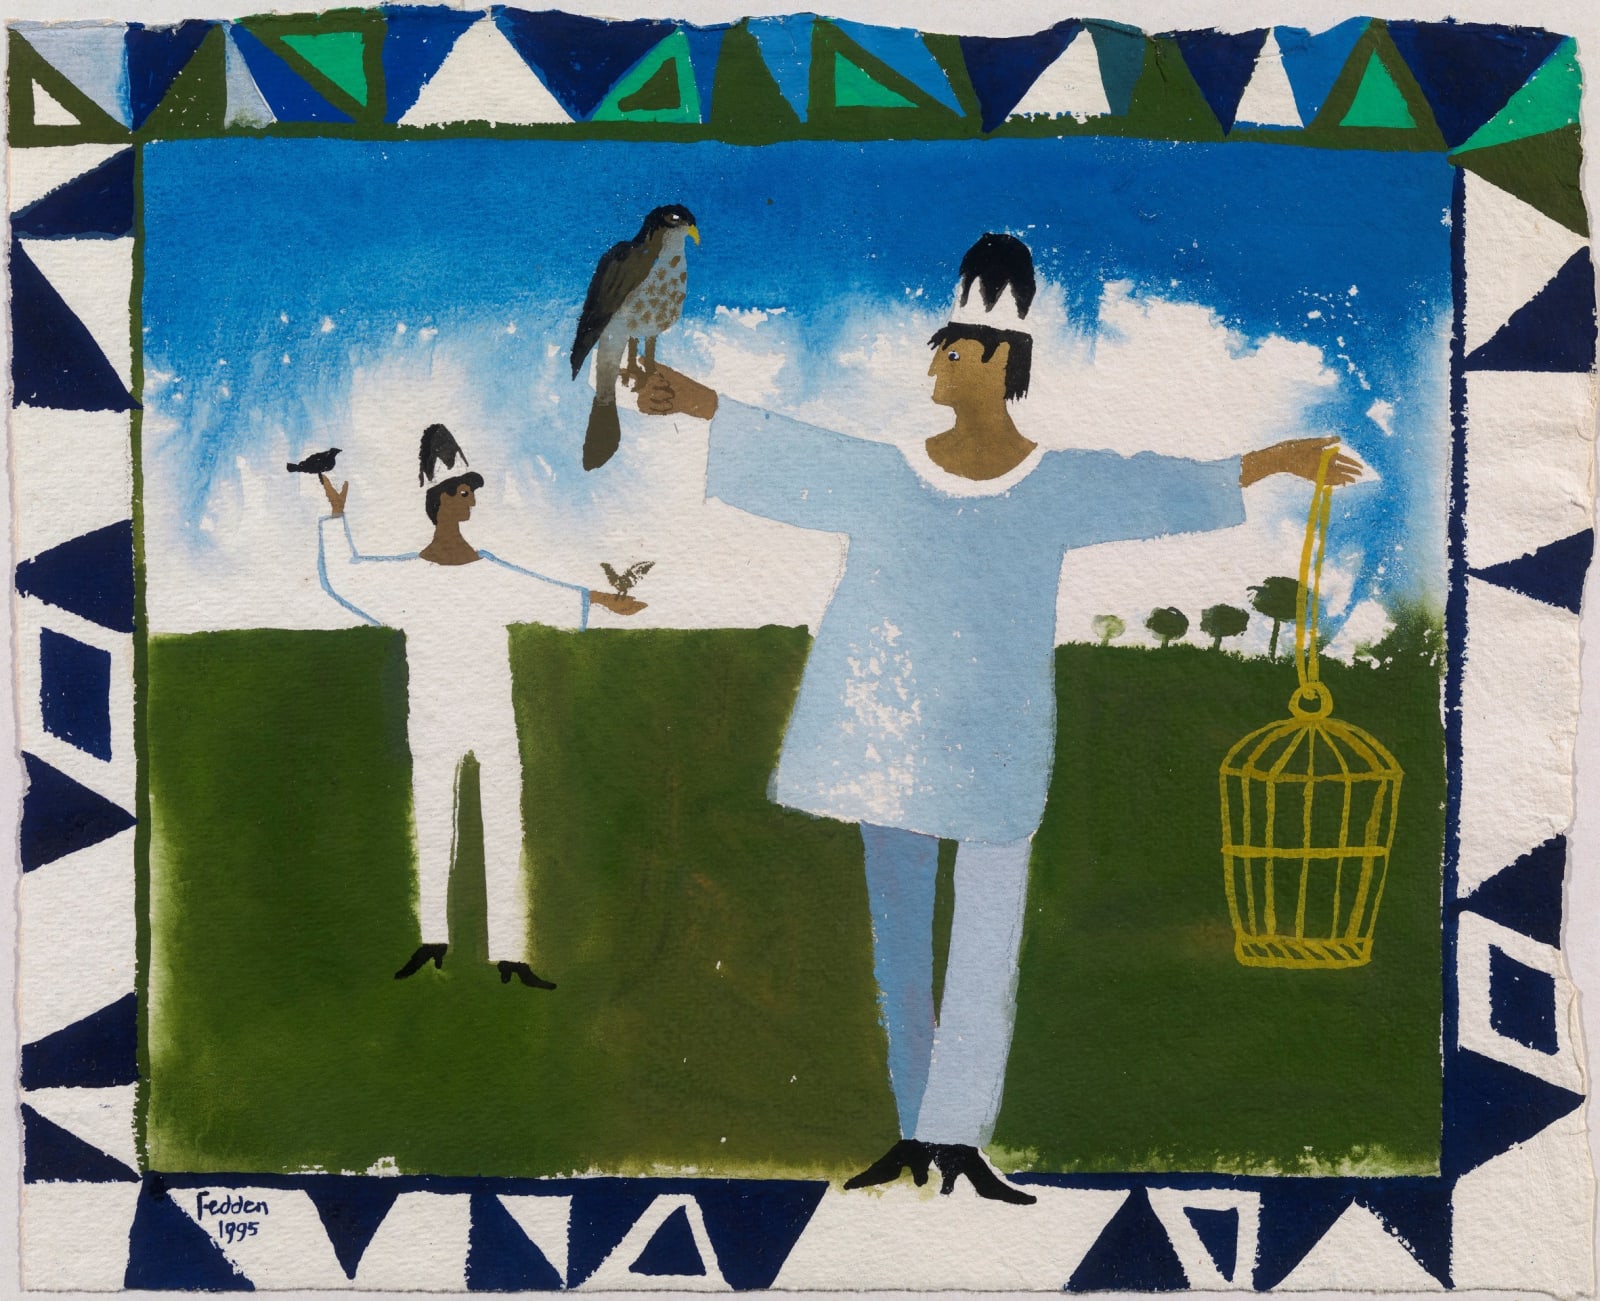 Mary Fedden, Two figures and birds, 1995